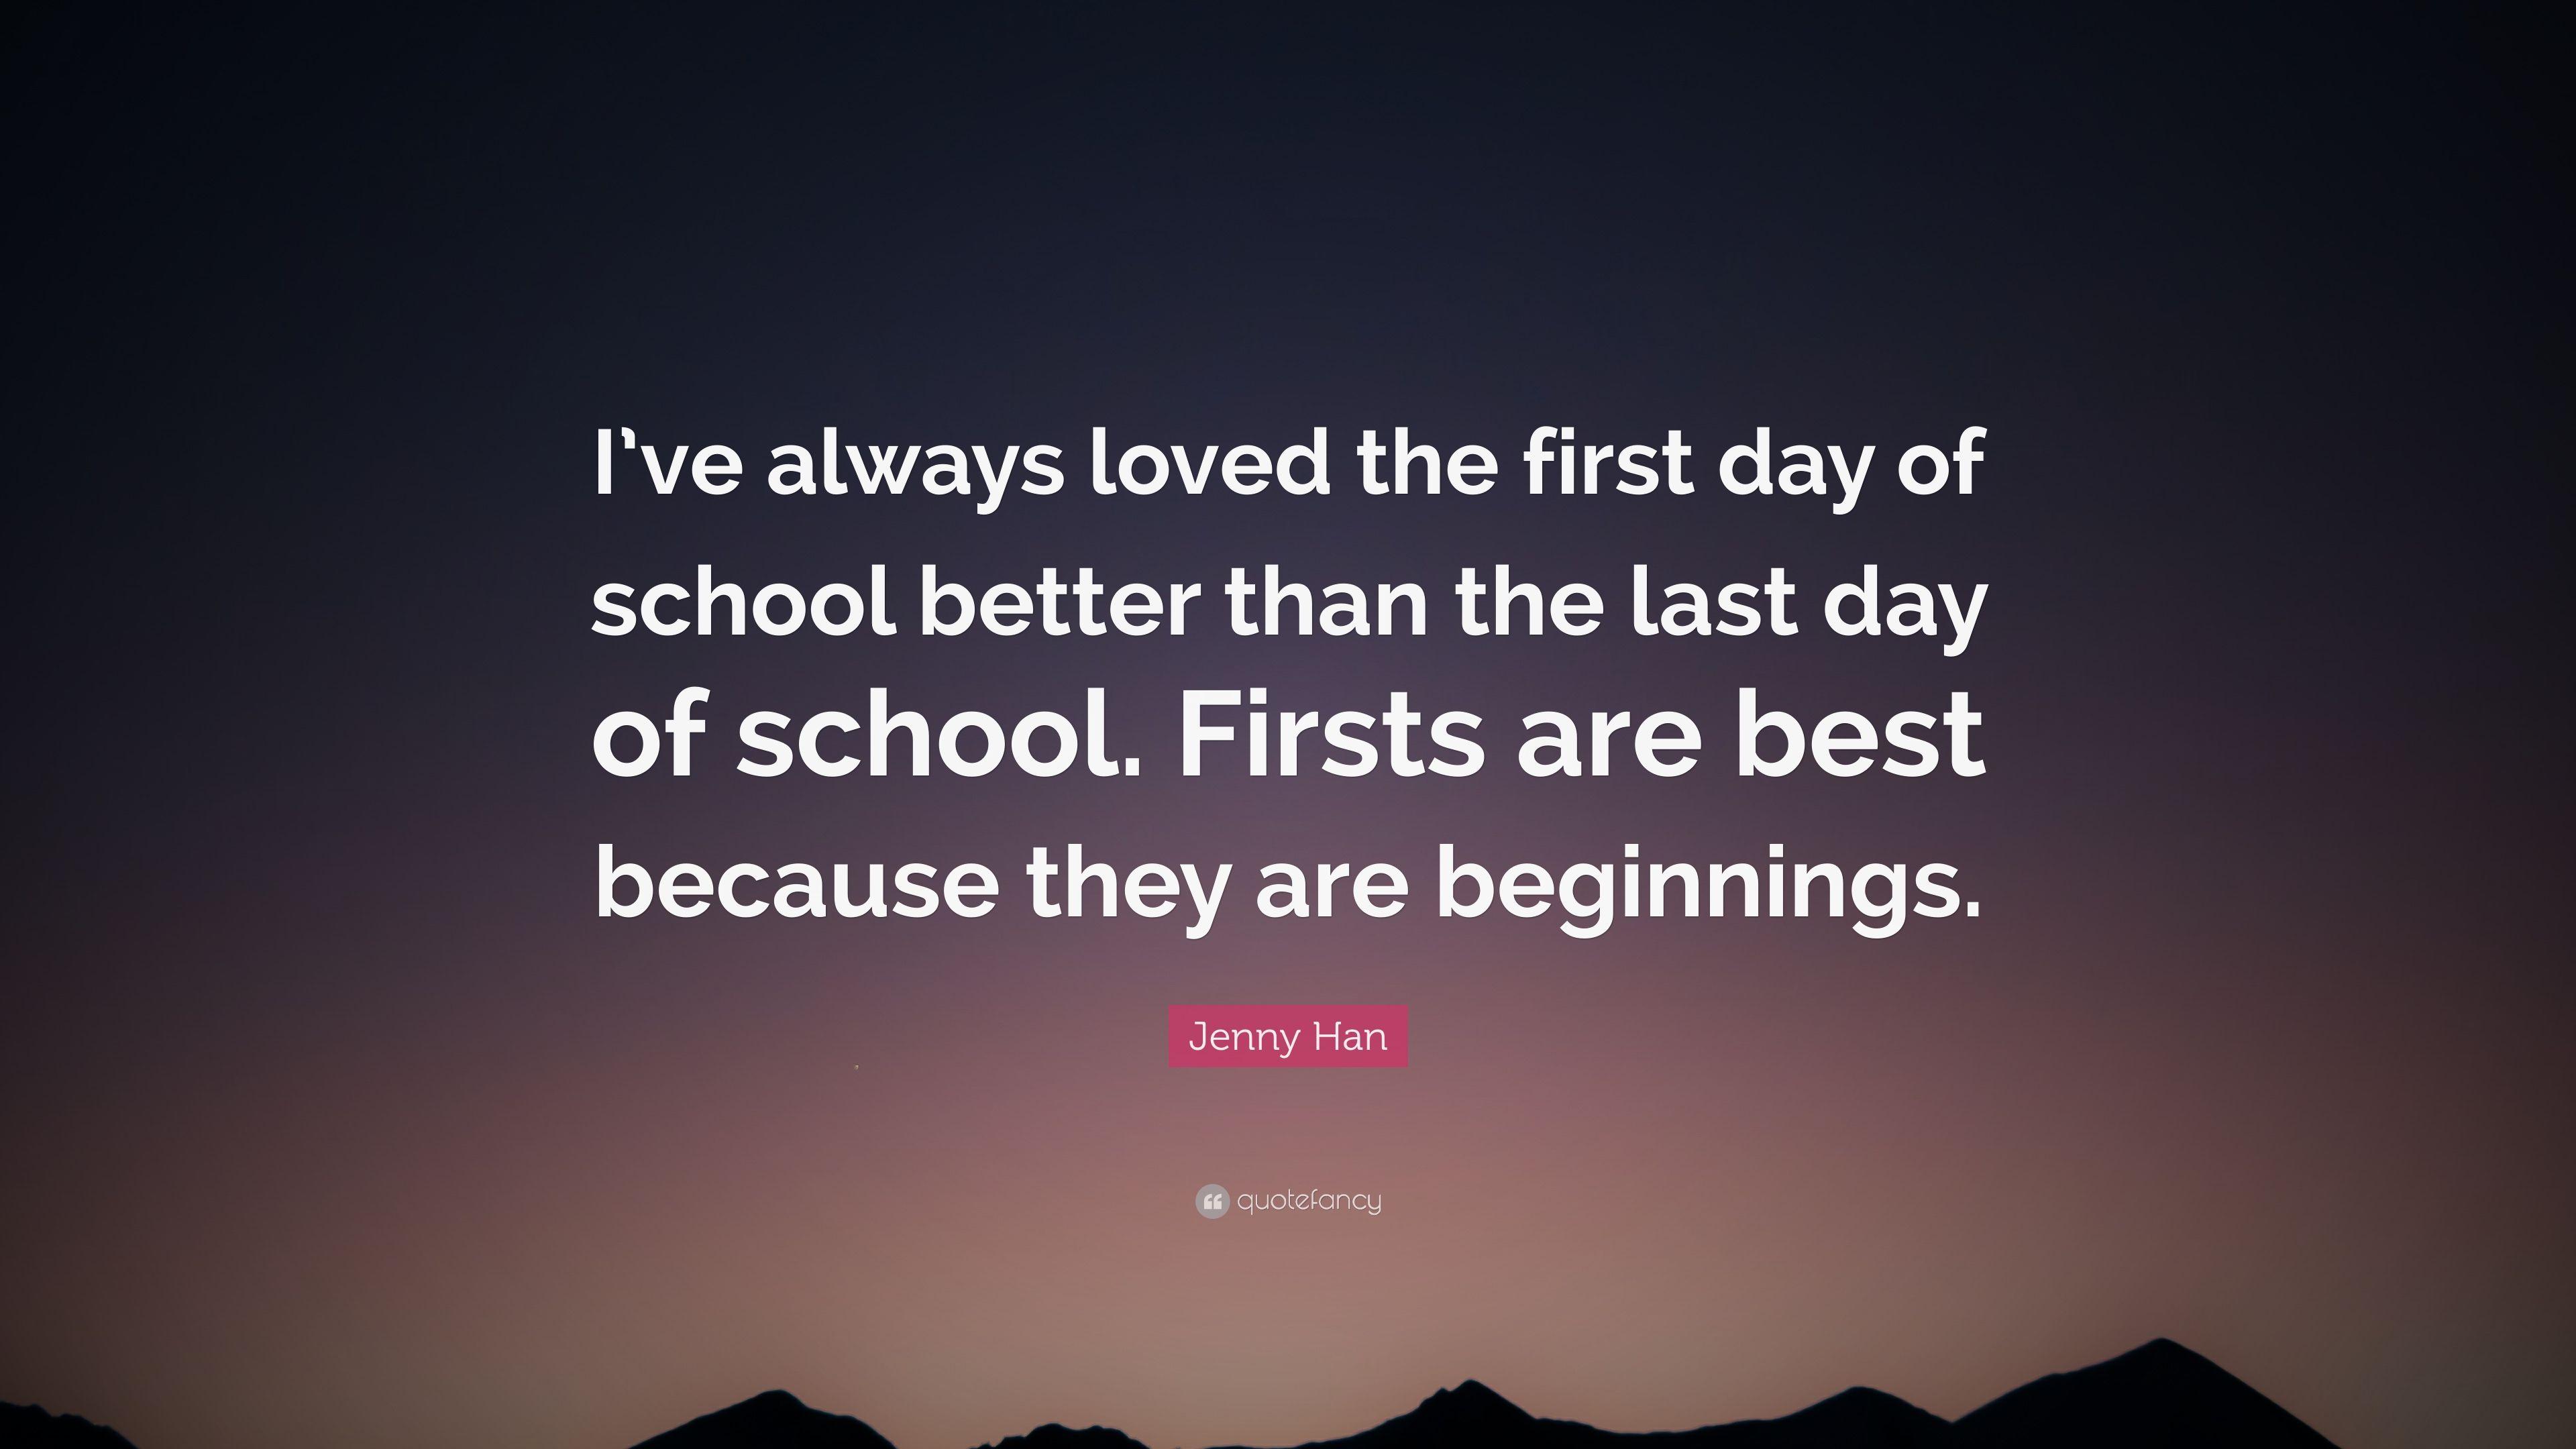 Jenny Han Quote: “I've always loved the first day of school better